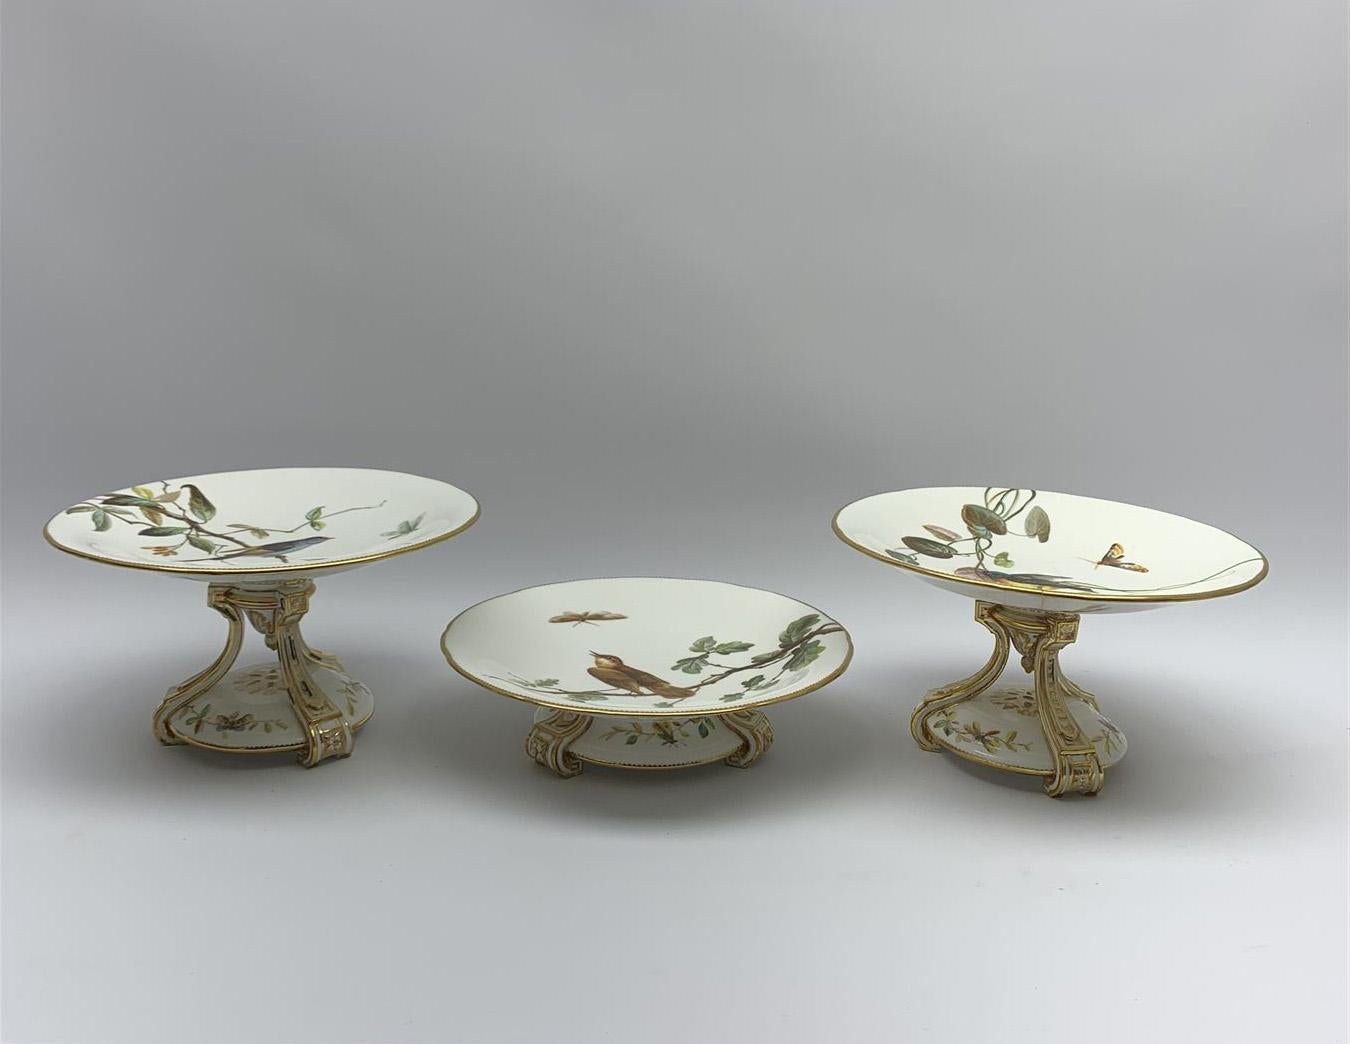 British 19th Century Minton Bird and Insect Dessert Service 17 Pieces For Sale